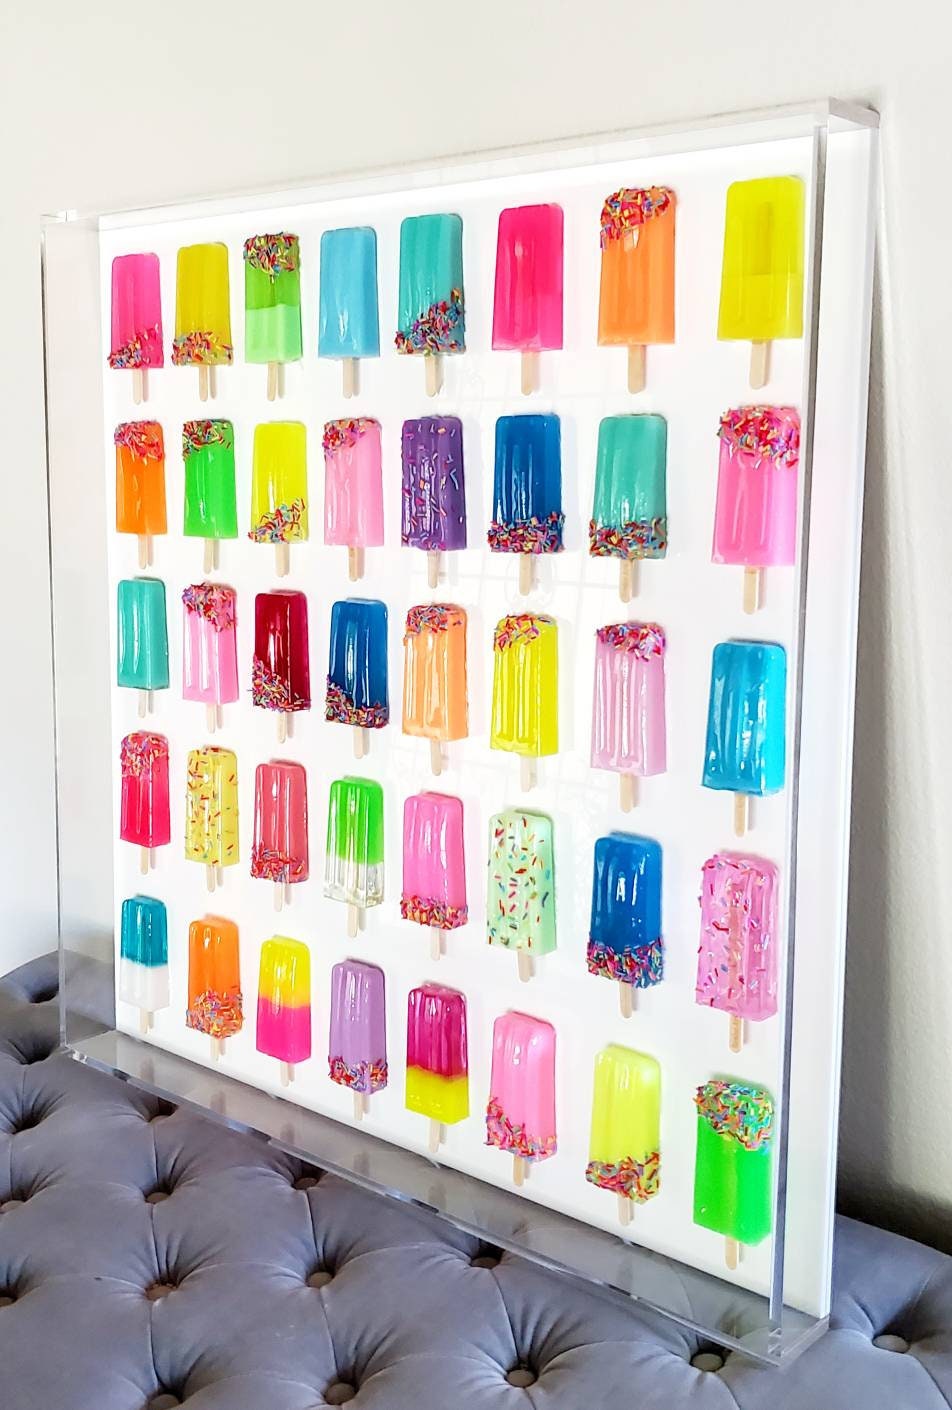 Pop Art Popsicle Wall Hanging, Home Decor, 32 Popsicle Sculptures, Business Decor, Candy Wall Art, Modern Kitchen Wall Decor, Rainbow Room.